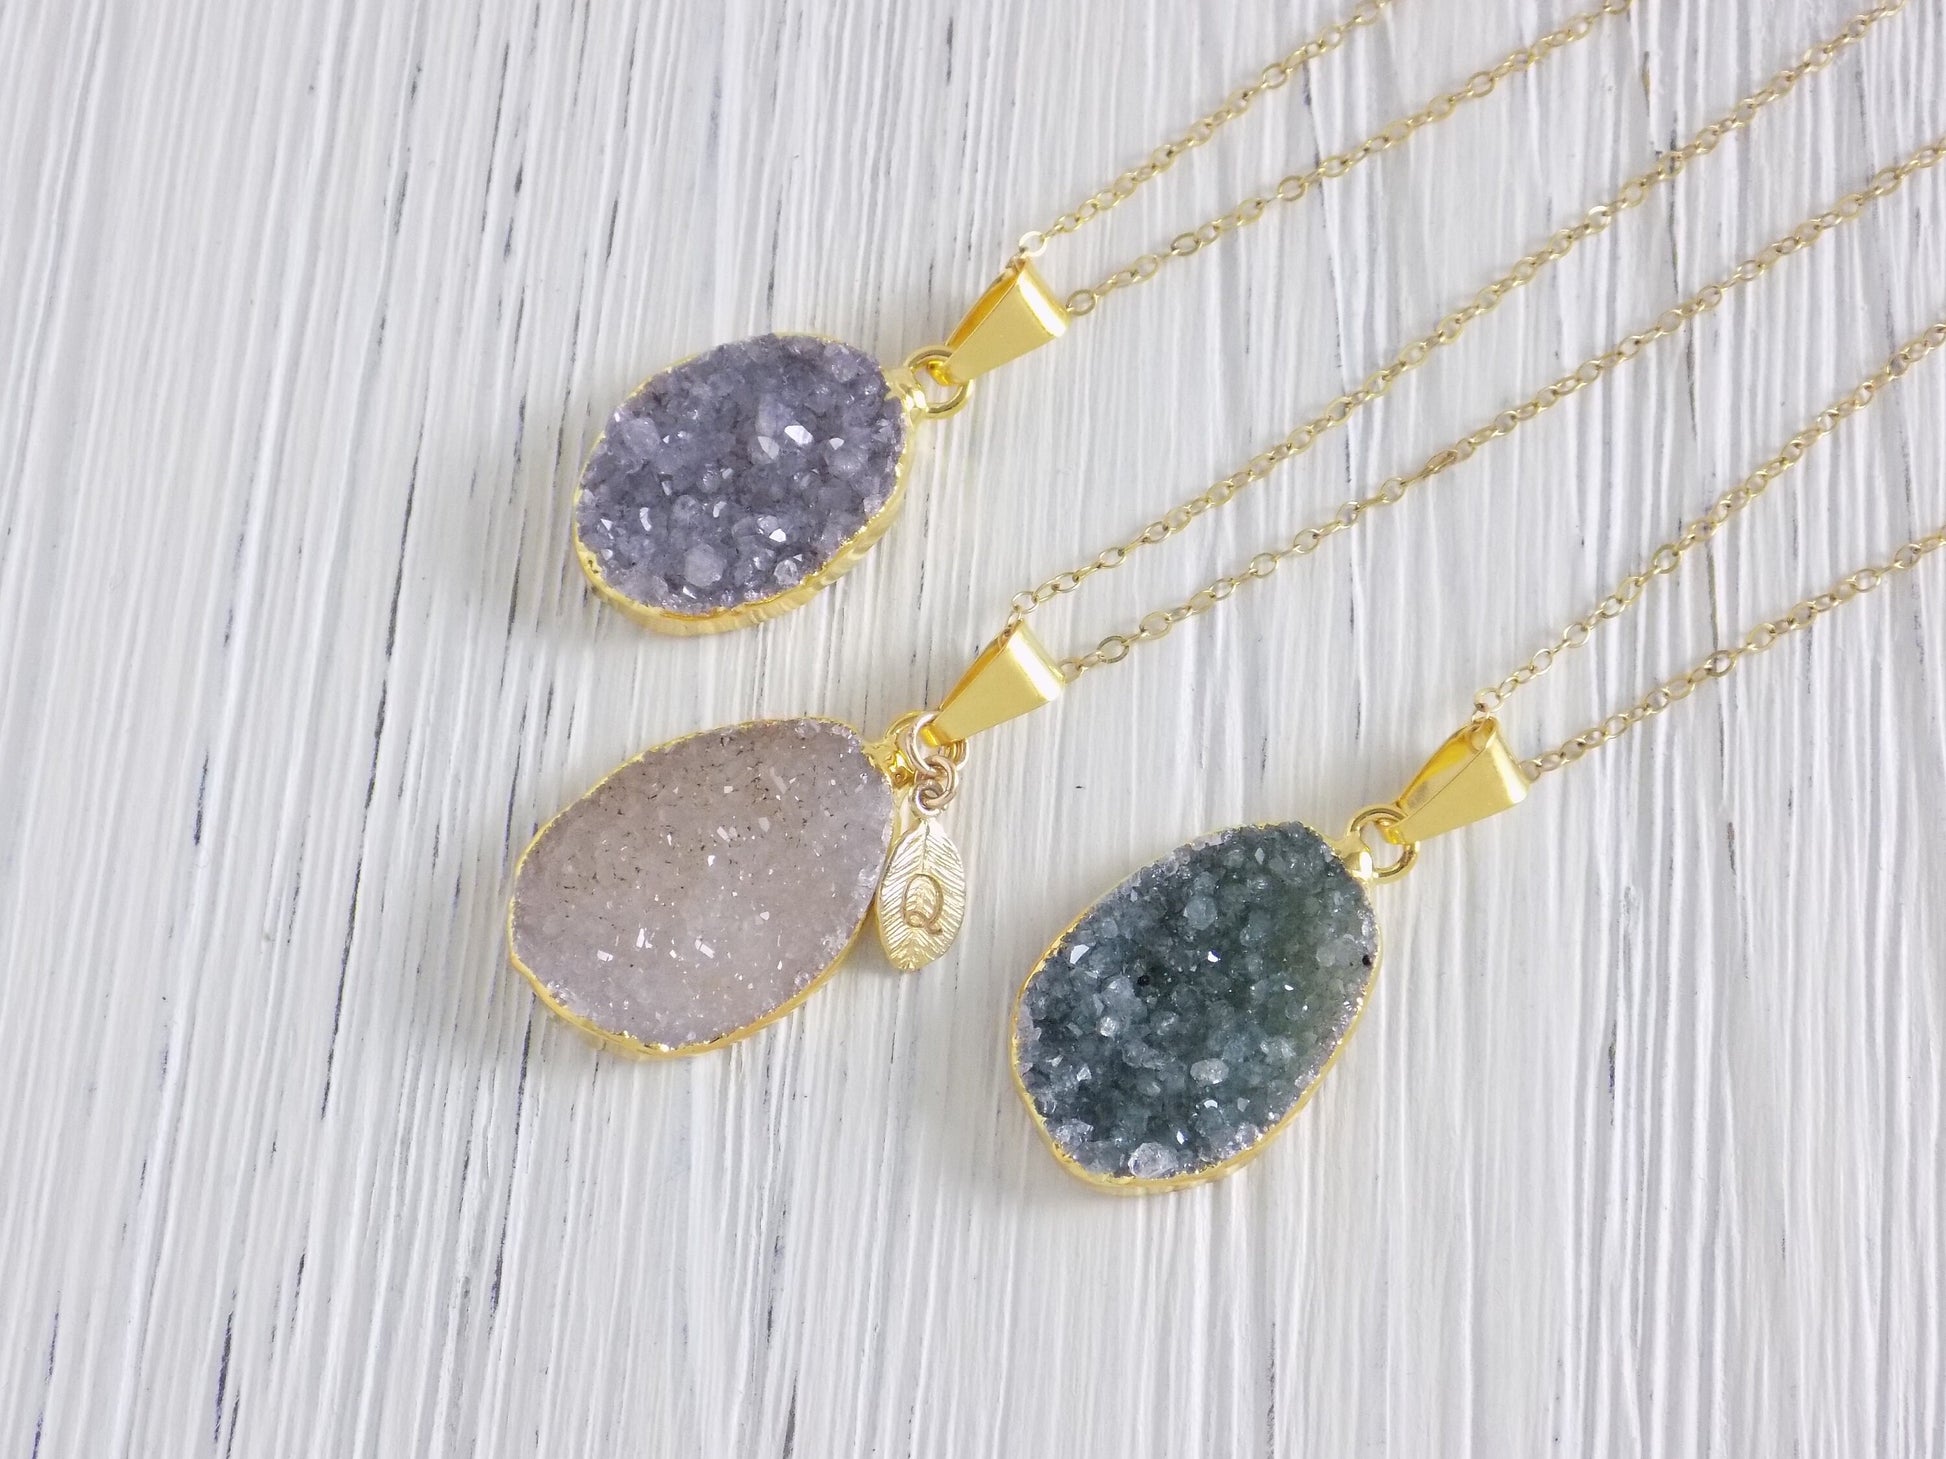 Personalized Druzy Necklace Gold Fill Chain - Drusy Pendant Necklaces For Women